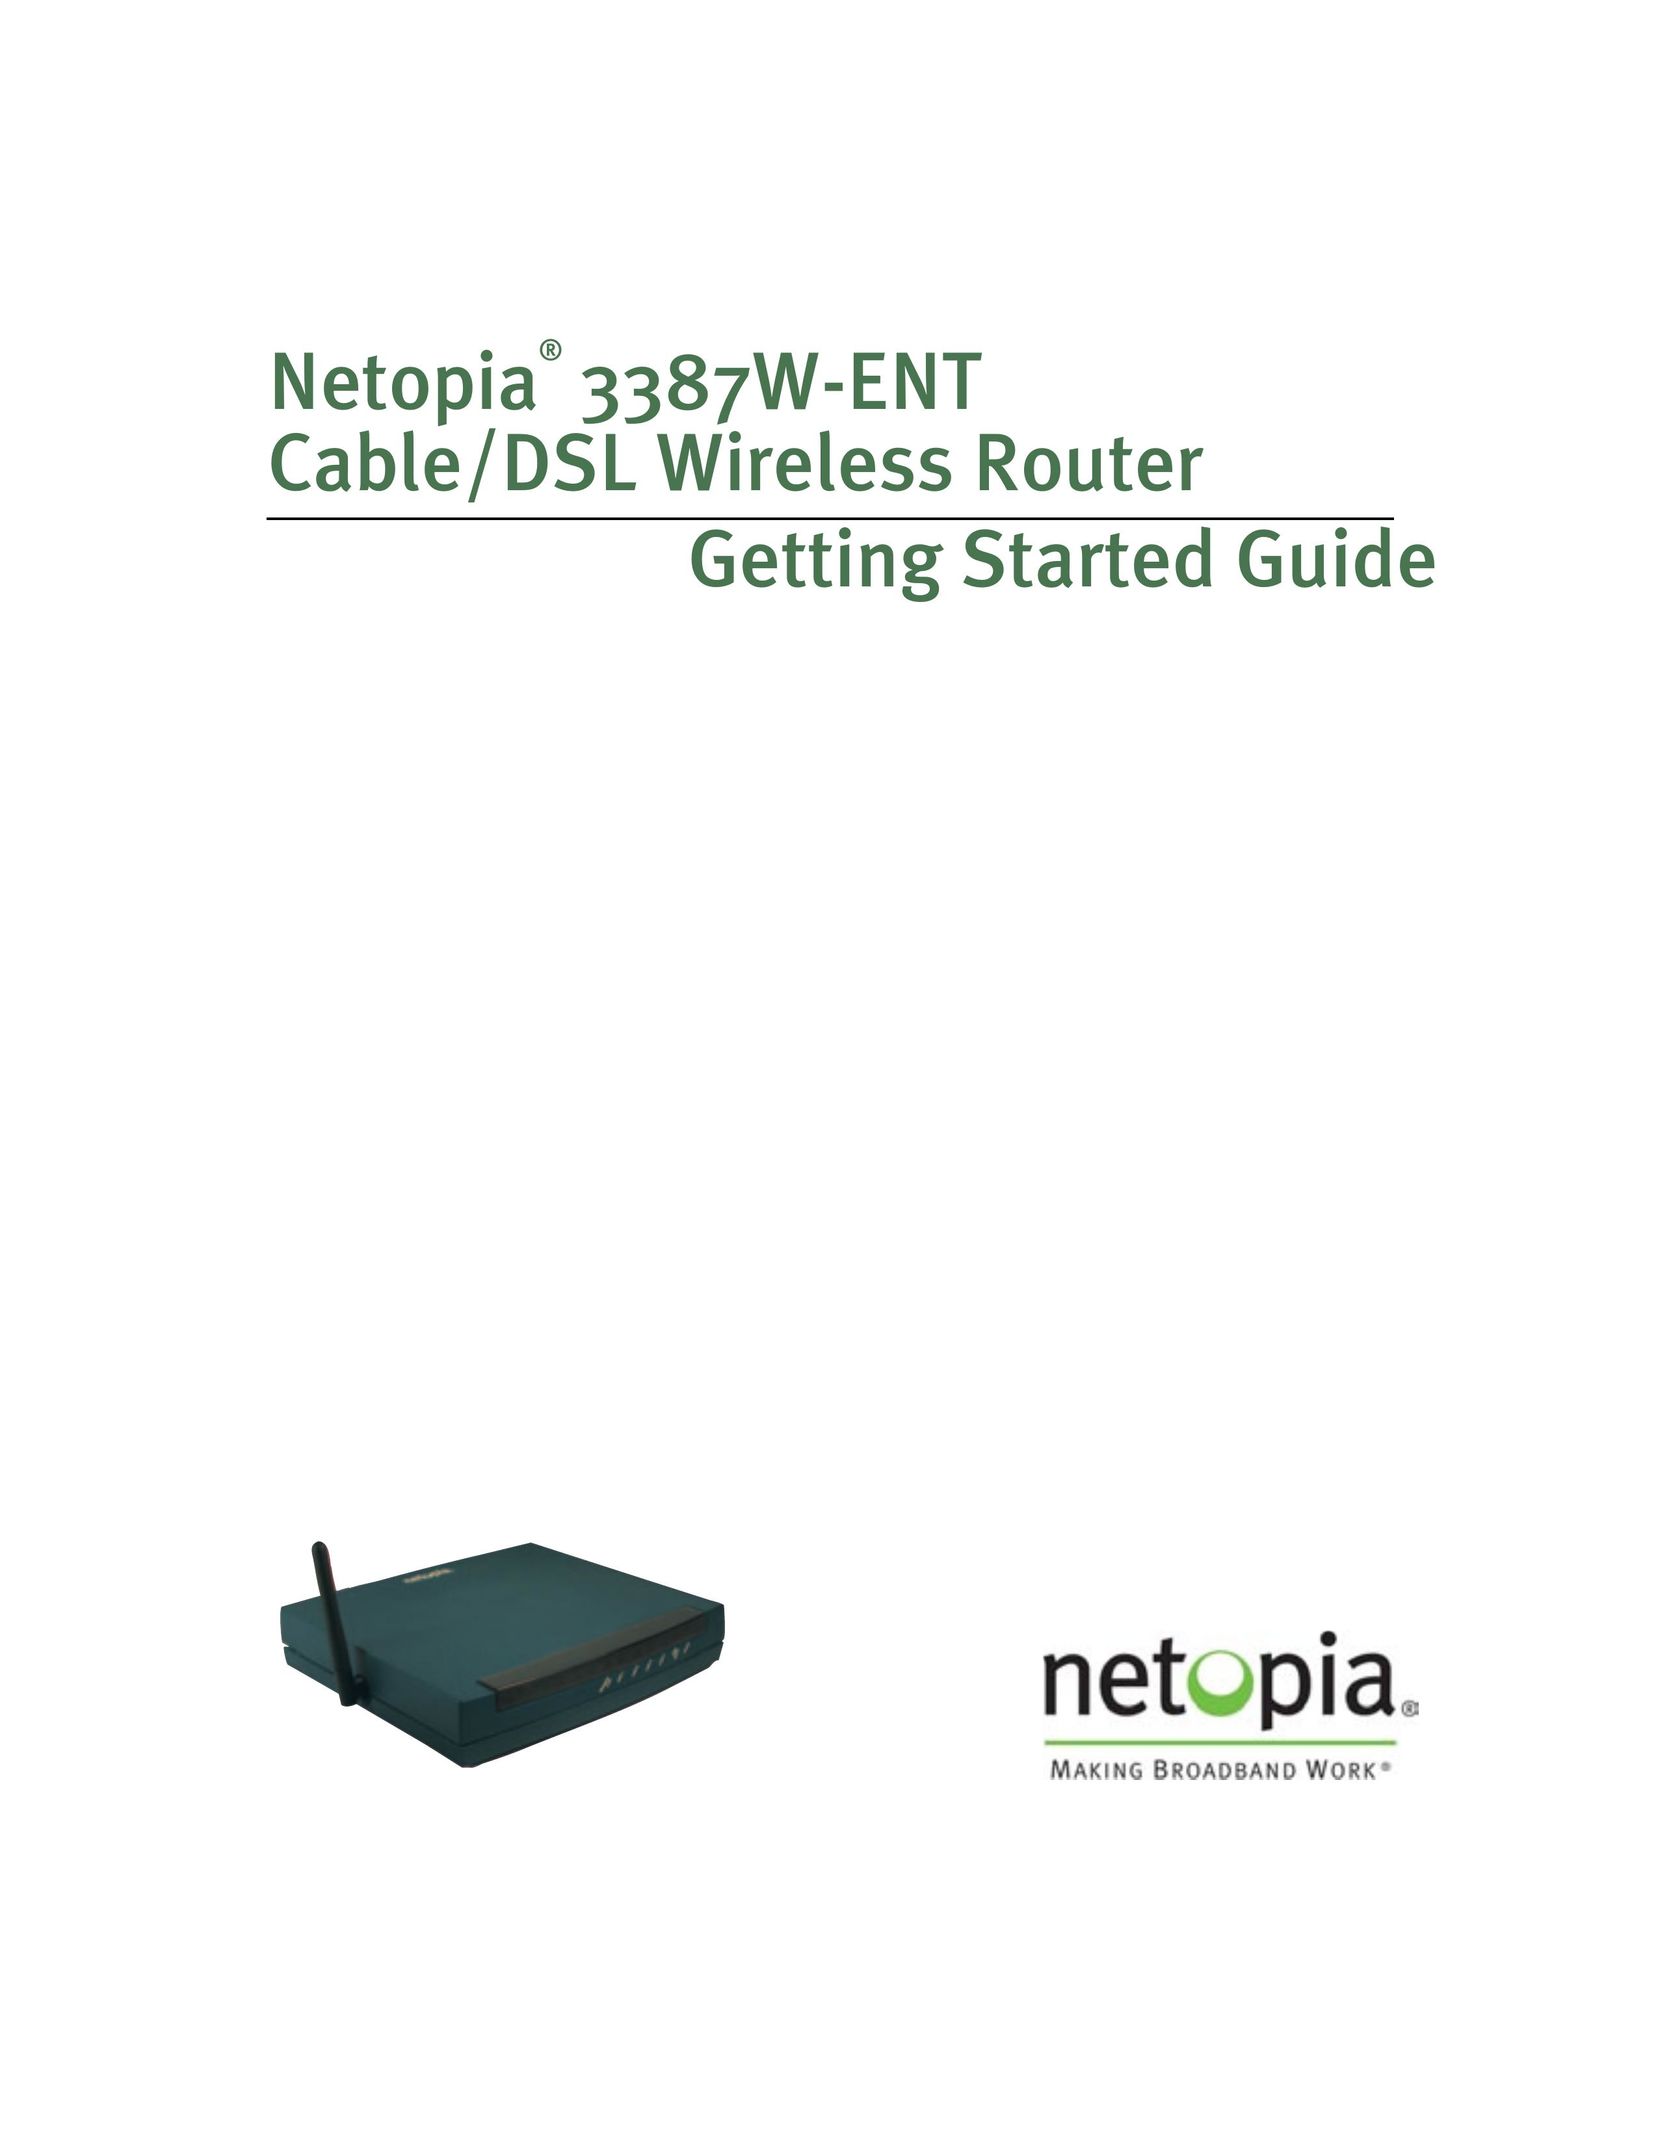 Netopia 3387W-ENT Network Router User Manual